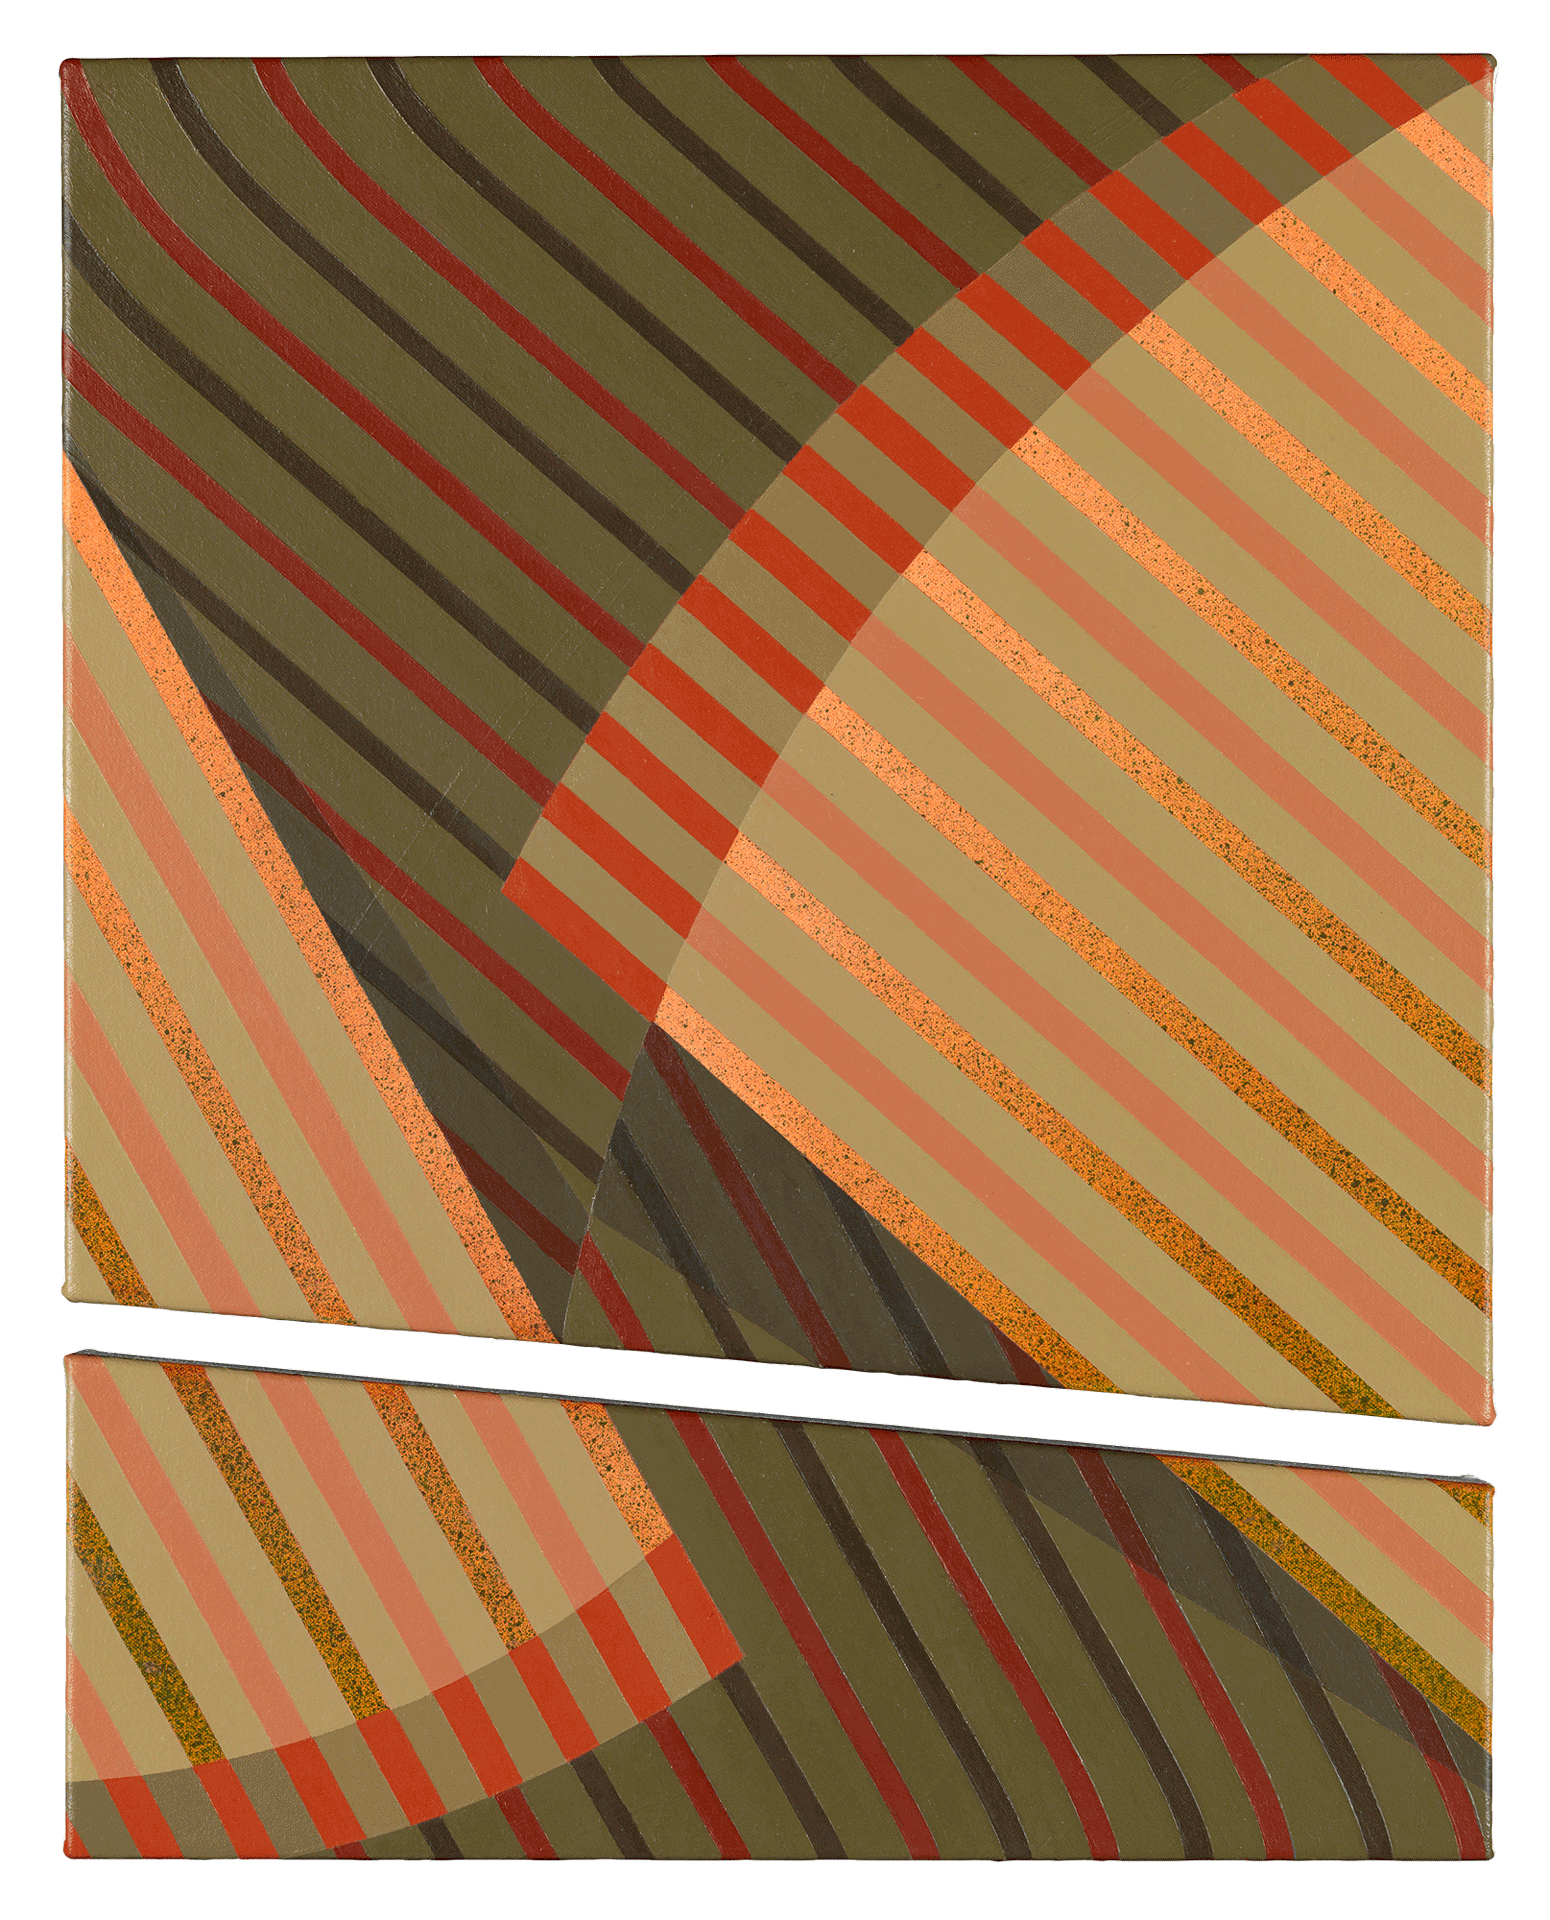 A painting by Tomma Abts, titled Wybe, dated 2014.